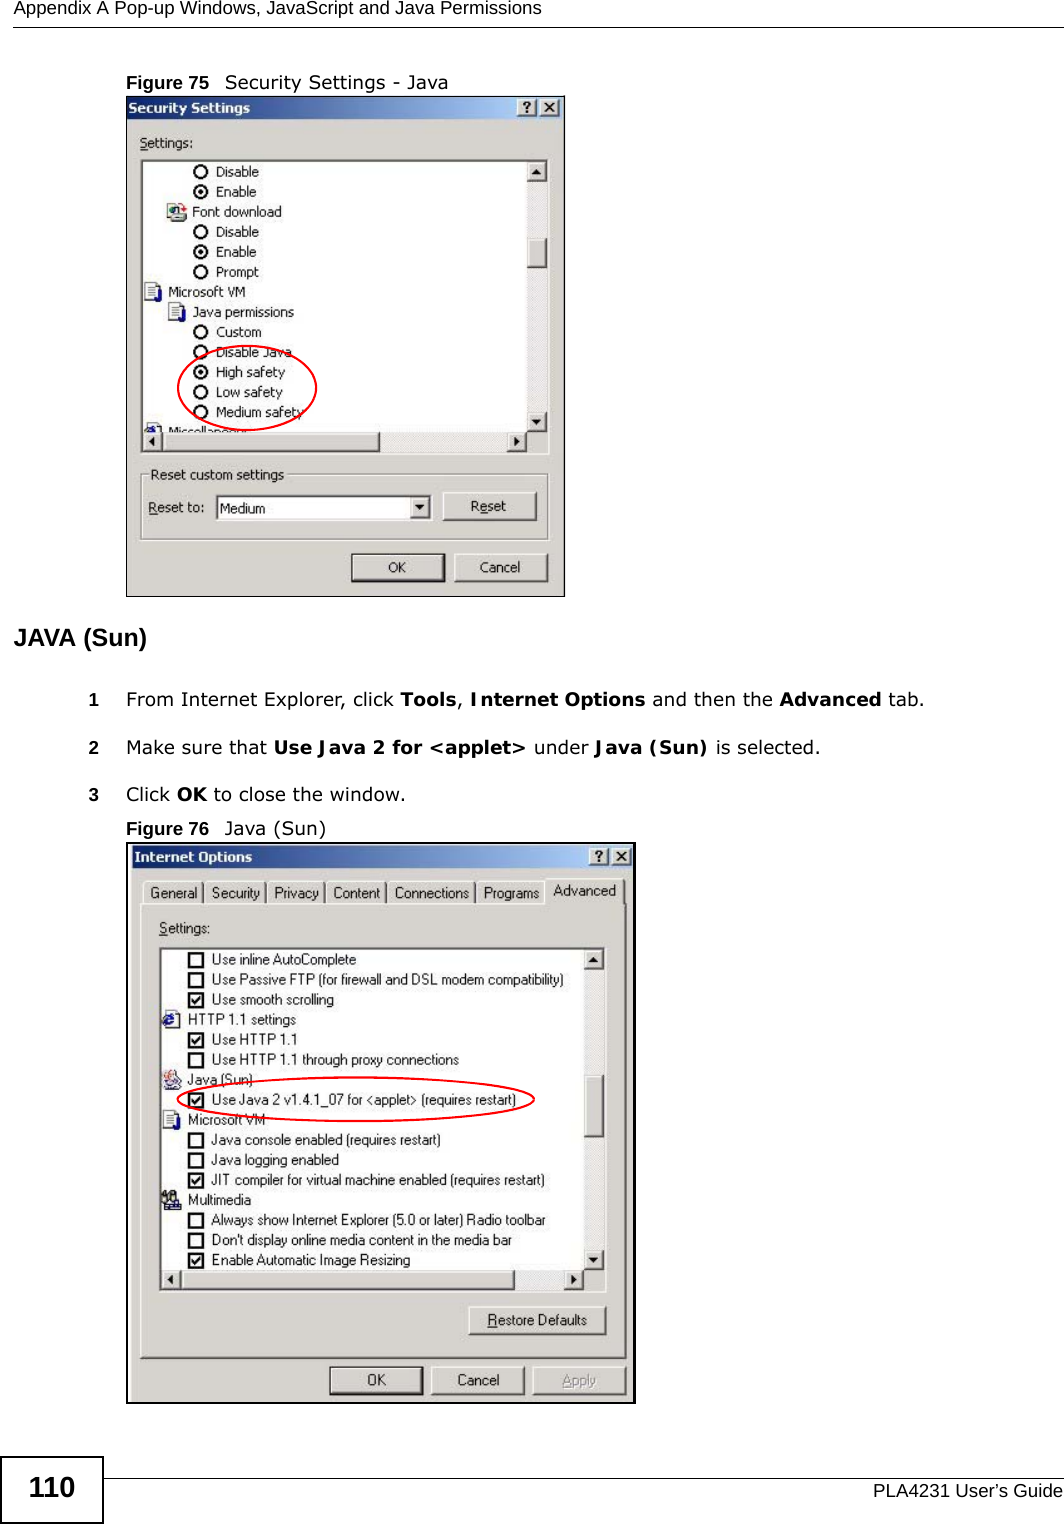 Appendix A Pop-up Windows, JavaScript and Java PermissionsPLA4231 User’s Guide110Figure 75   Security Settings - Java JAVA (Sun)1From Internet Explorer, click Tools, Internet Options and then the Advanced tab. 2Make sure that Use Java 2 for &lt;applet&gt; under Java (Sun) is selected.3Click OK to close the window.Figure 76   Java (Sun)